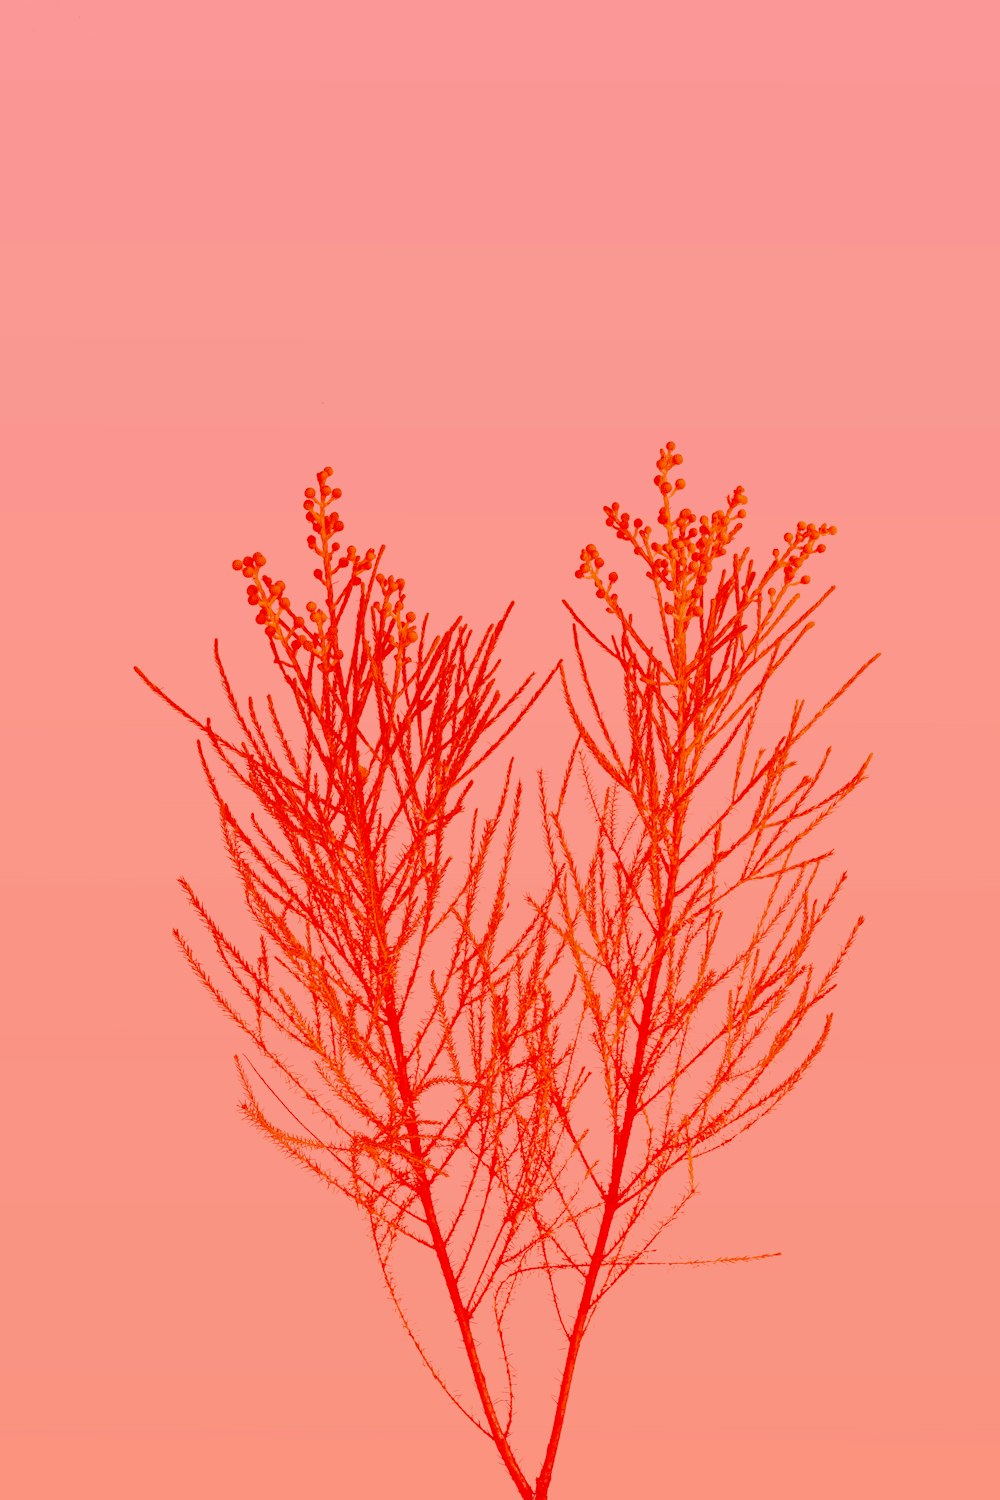 a small tree with no leaves in front of a pink background